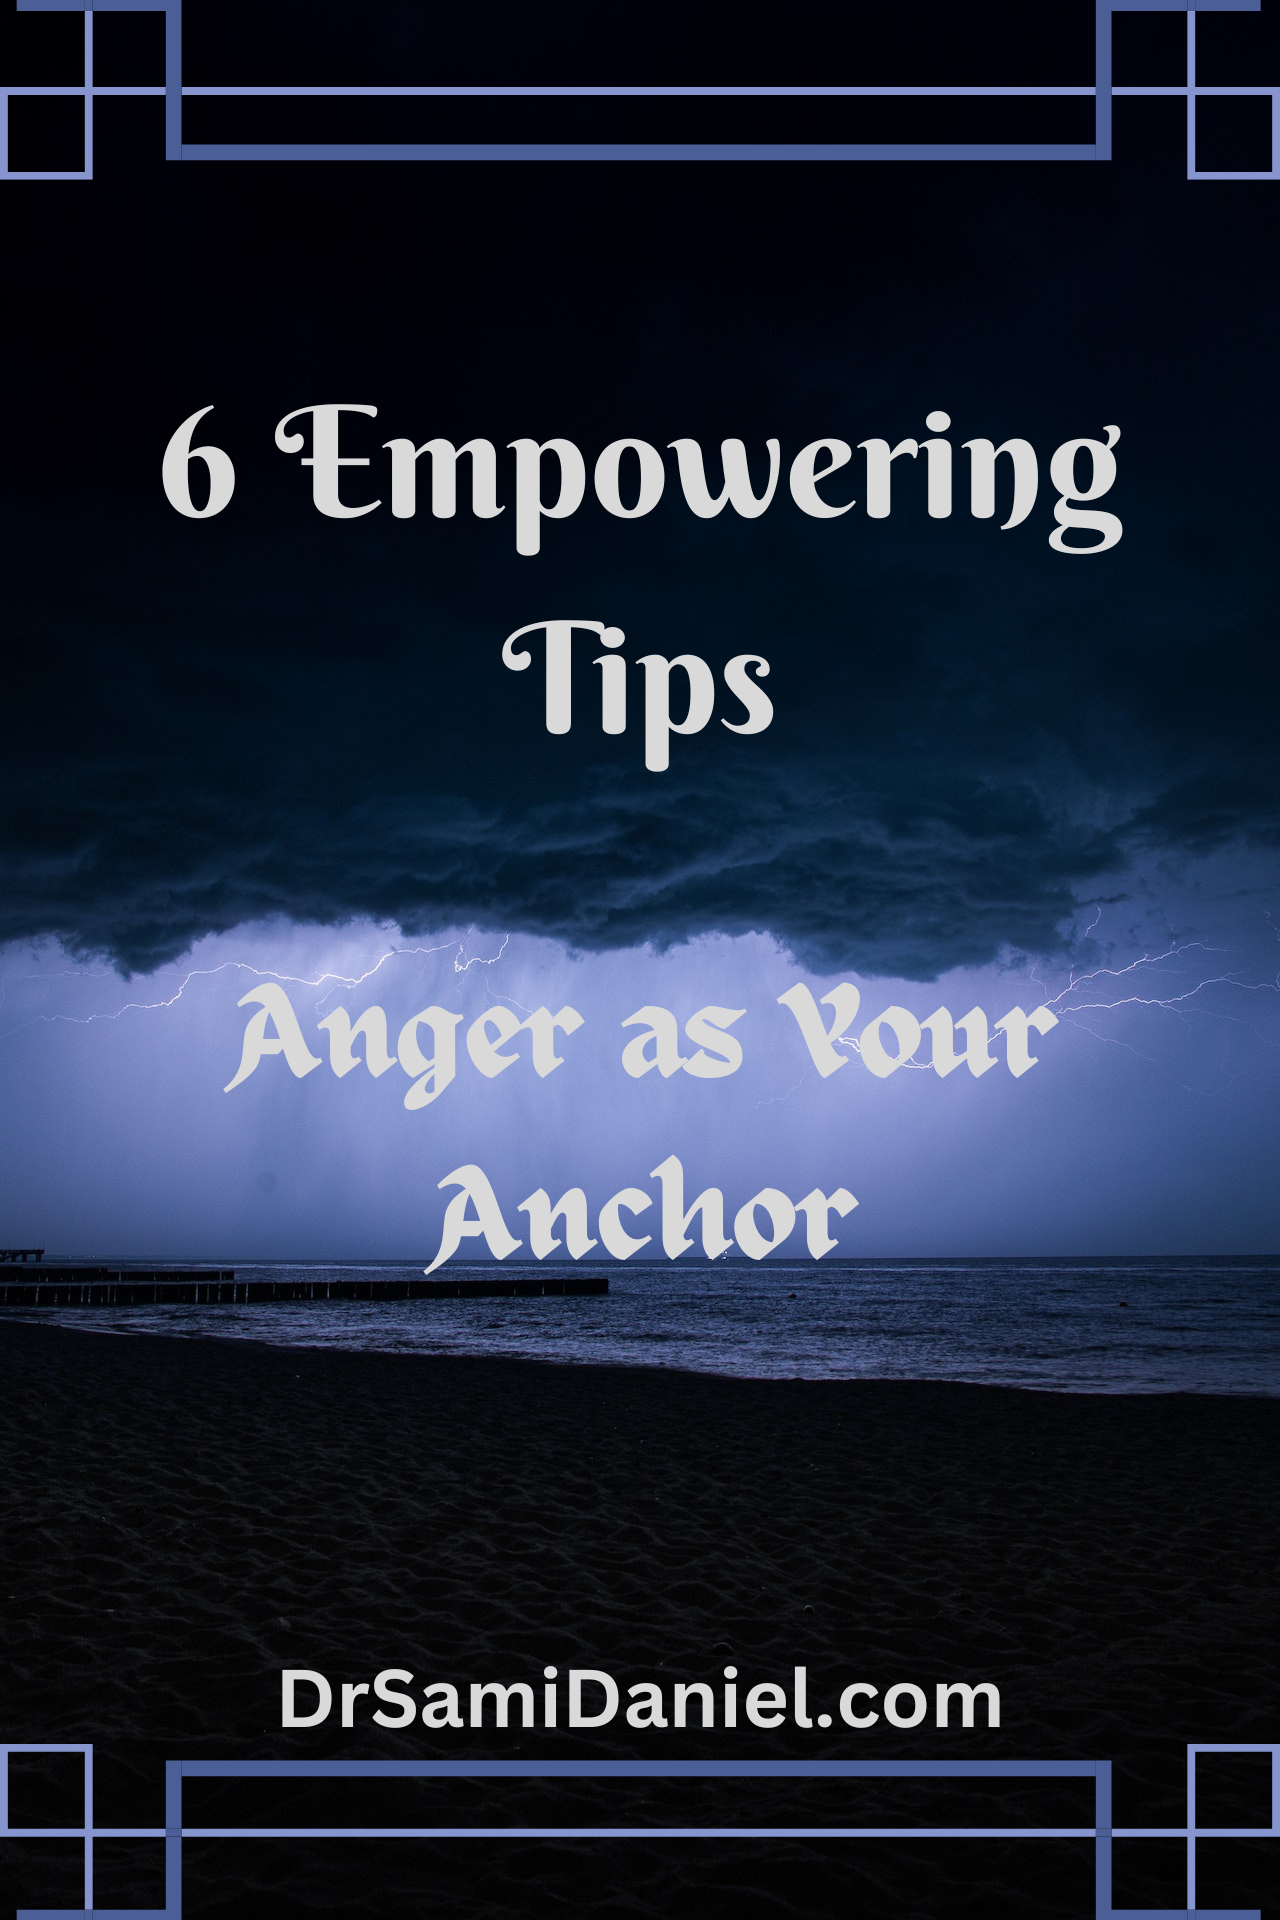 6 powerful tips on how to use anger as your anchor